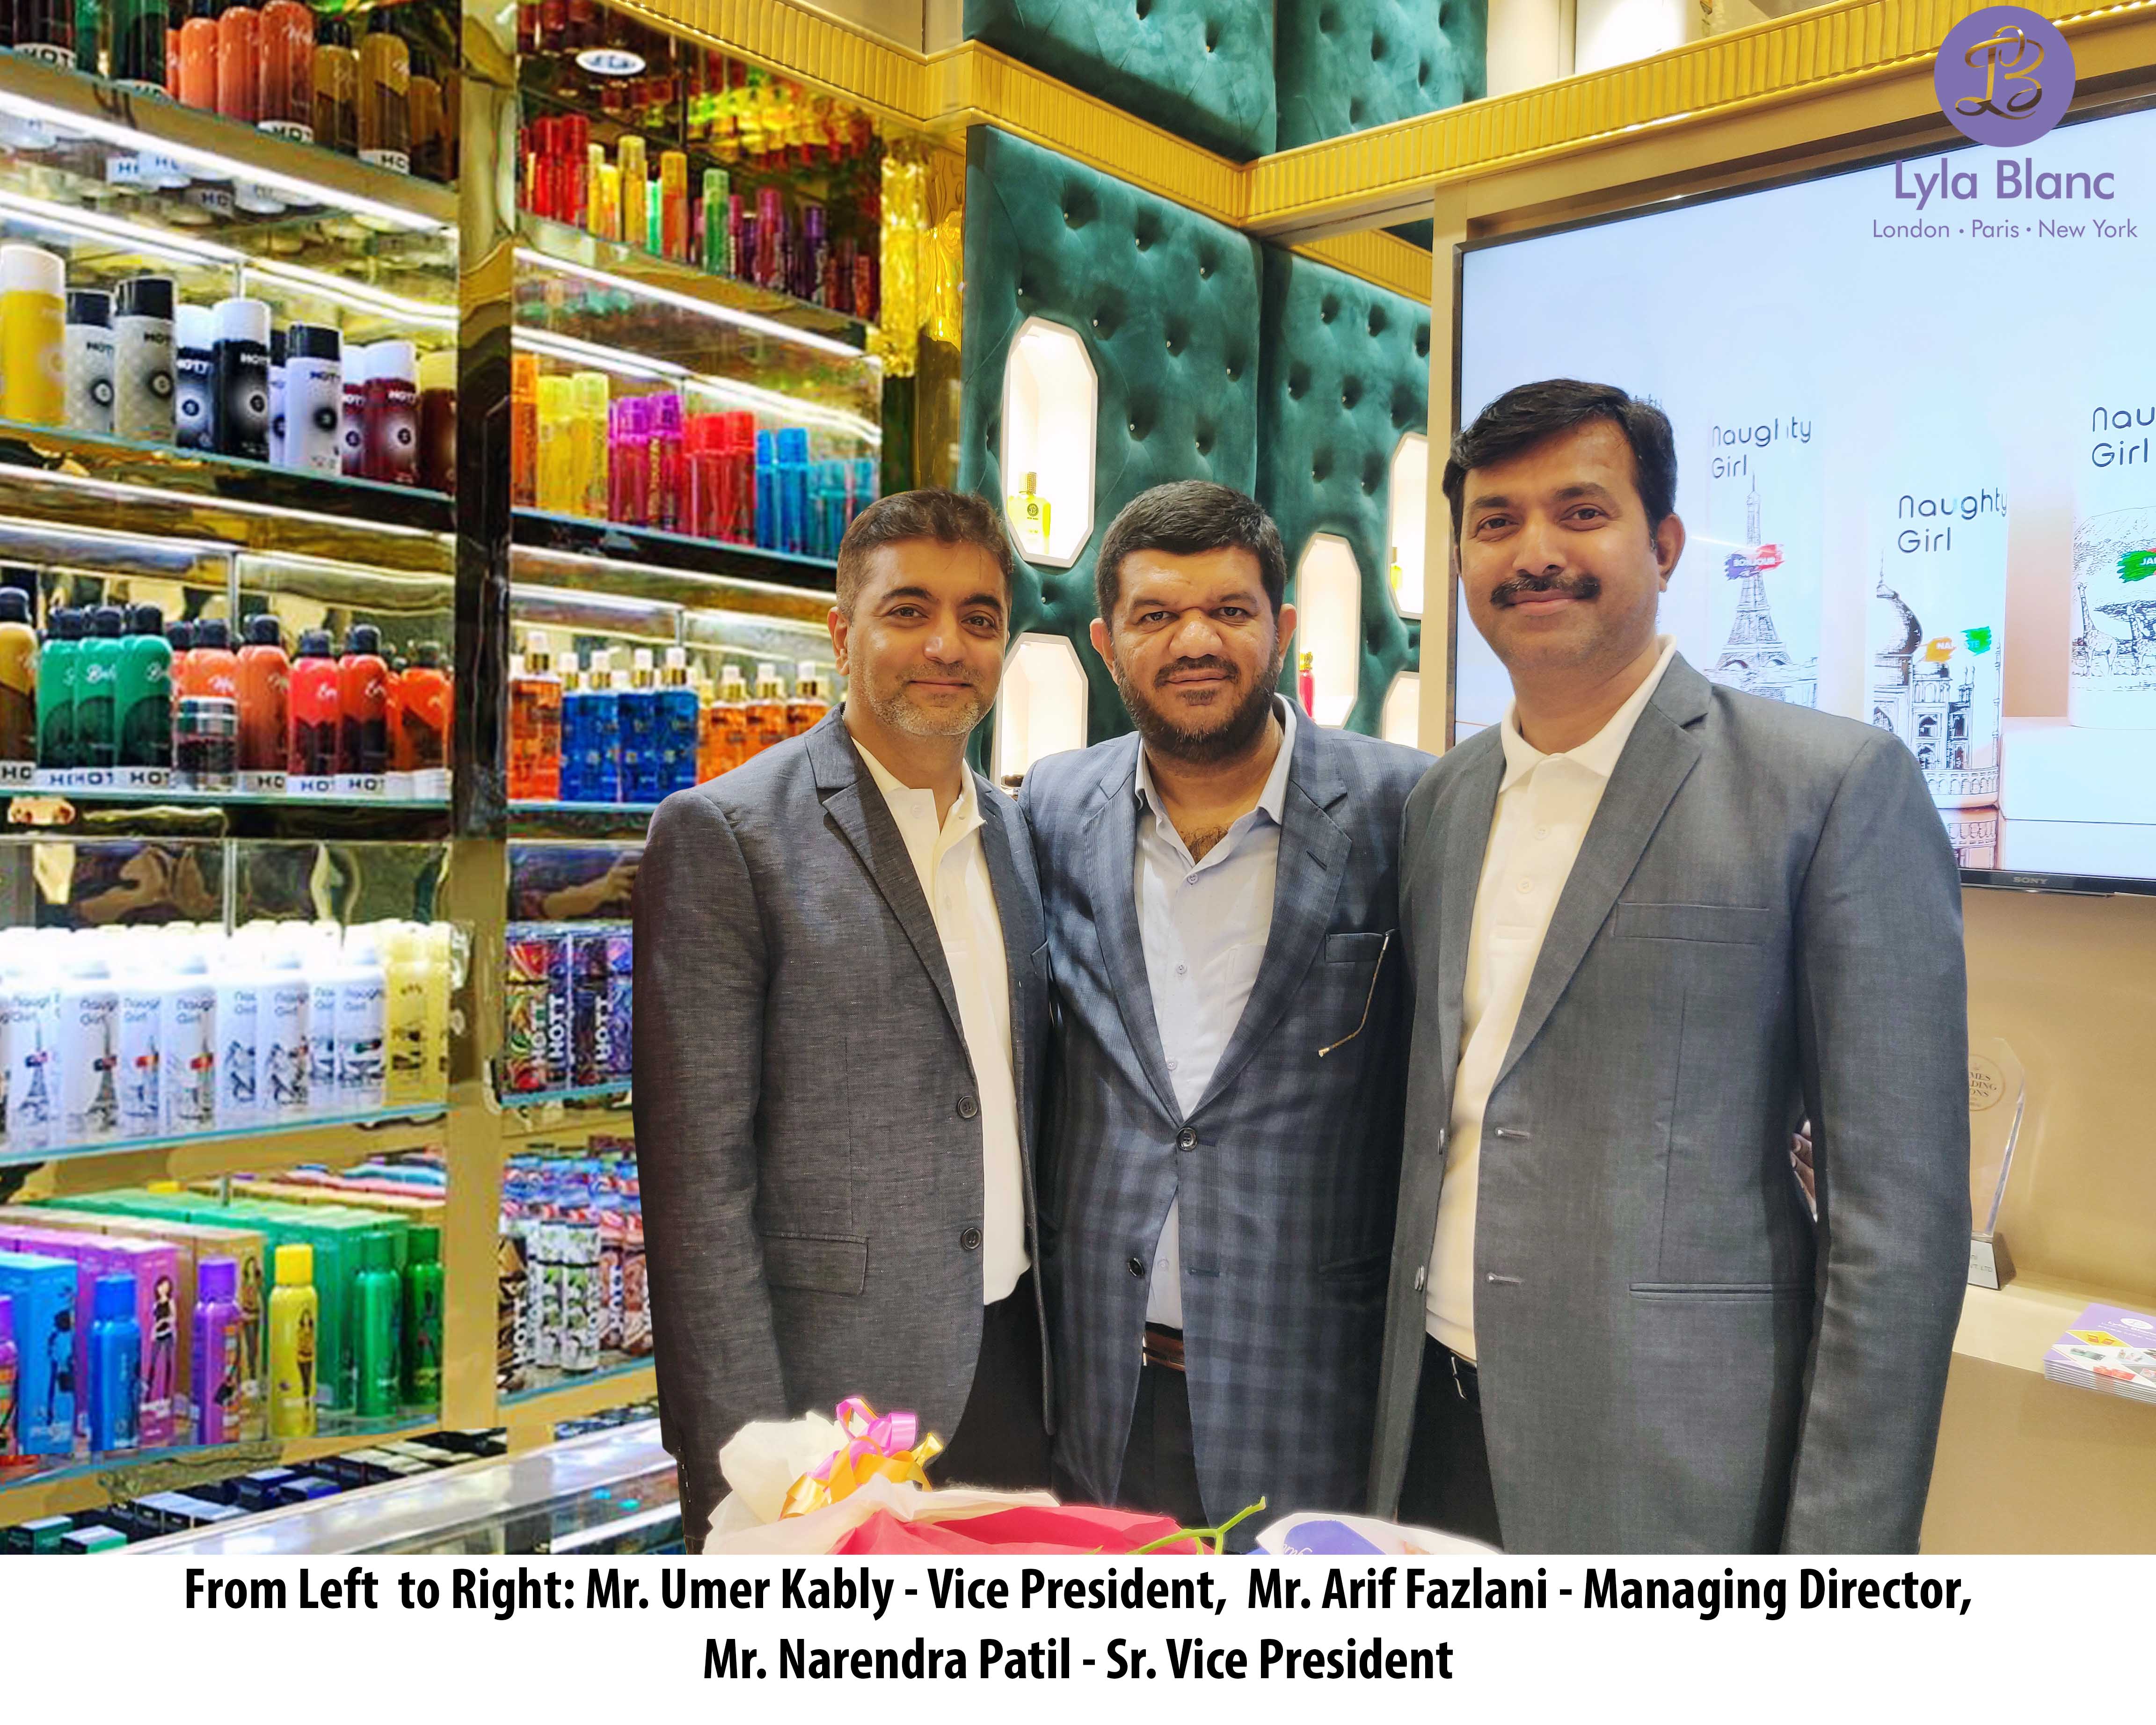 Lyla Blanc perfume launches first store in India with 300 exclusive products